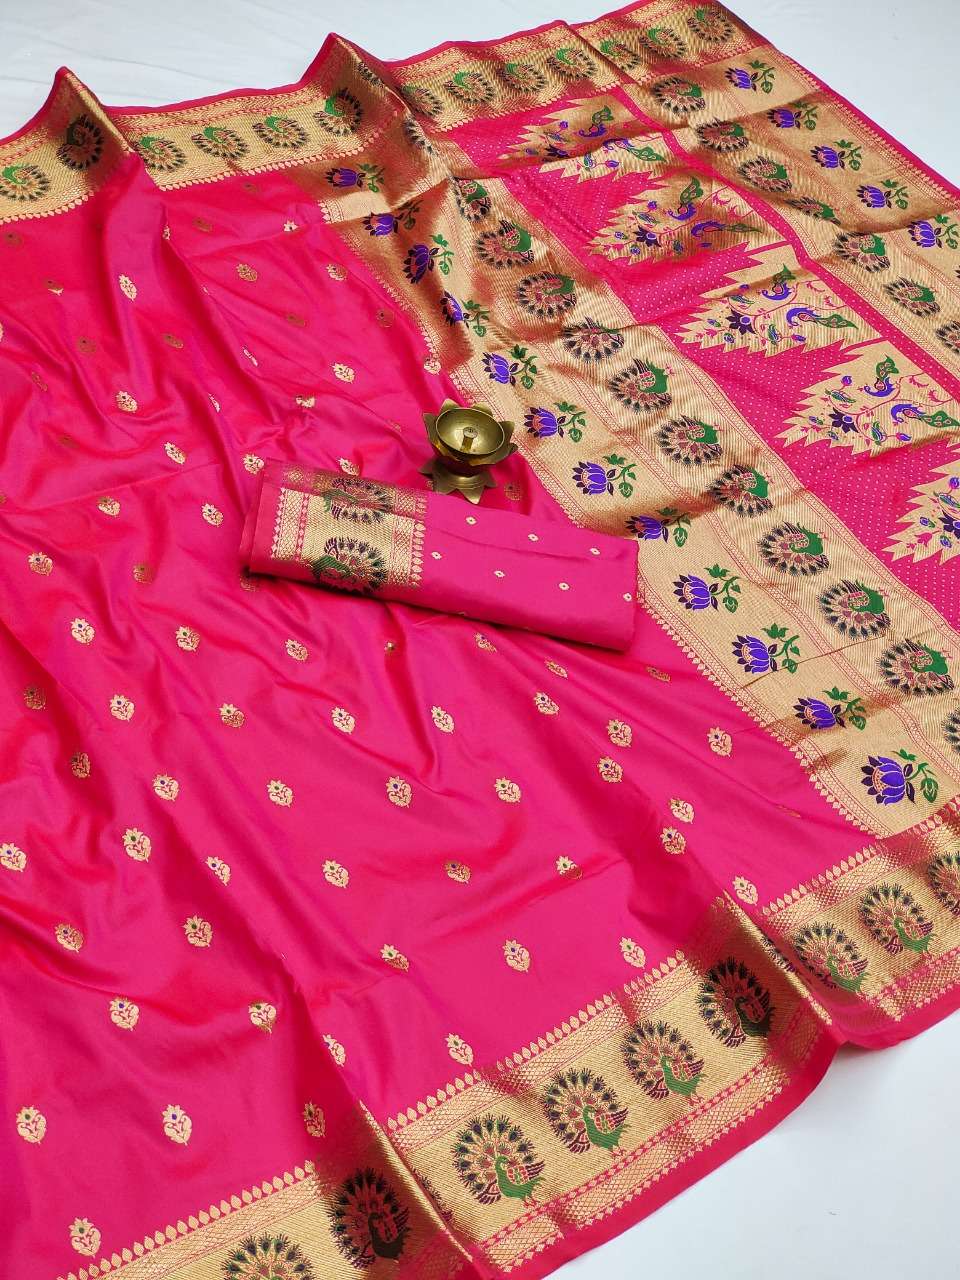 LATEST LAUNCH OF PAITHANI SILK WITH FINNEST WEAVING AND LOVELY TEXTURE ...